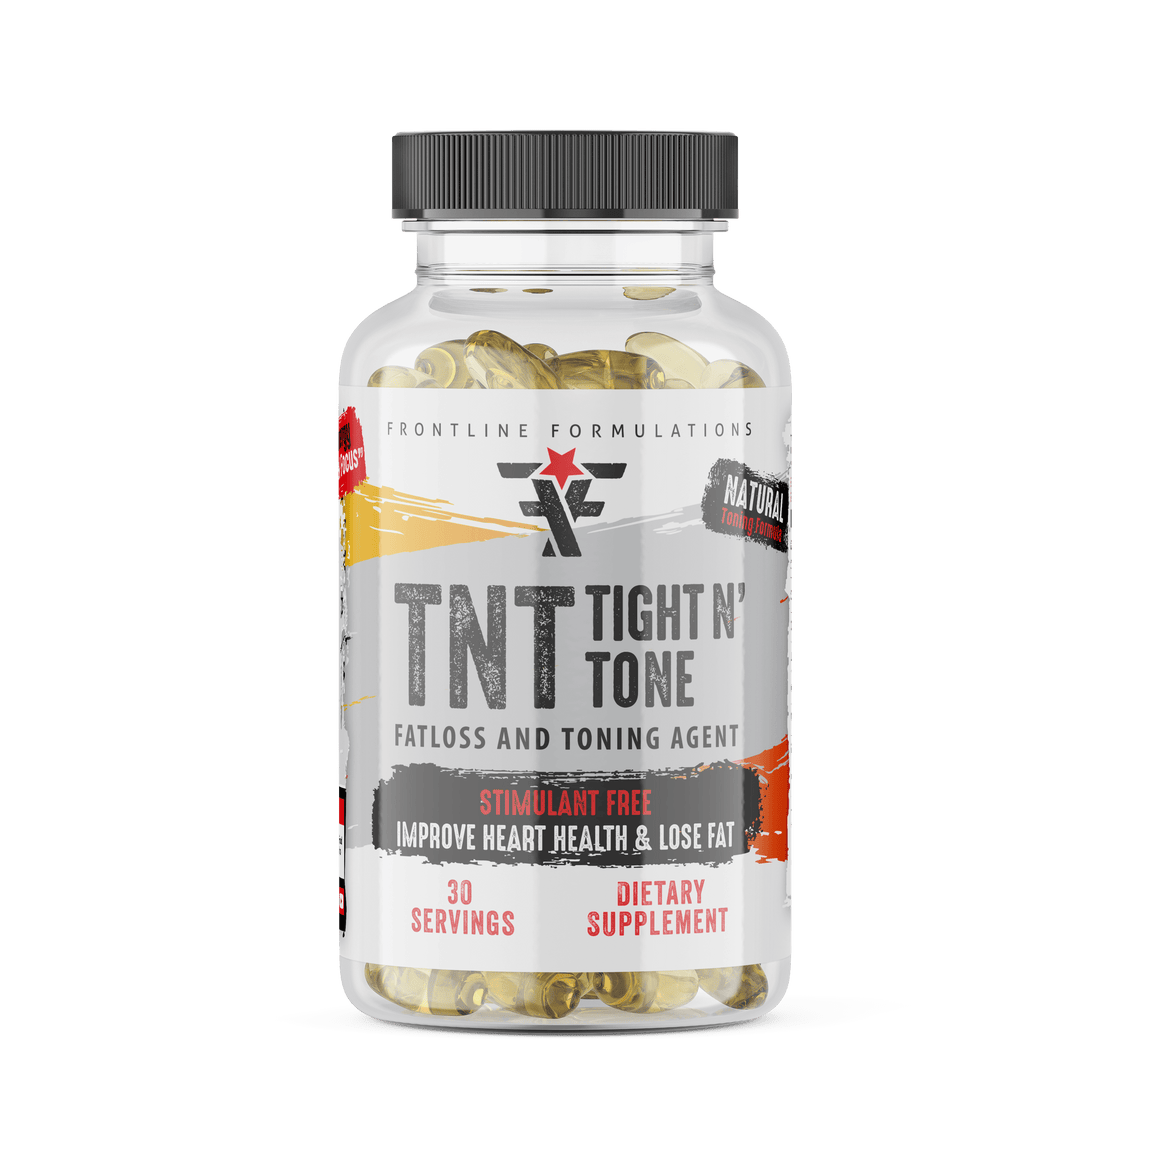 Frontline Formulations Tight-N-Tone TNT is a non-stimulant muscle toner that combines the heart and cardiovascular benefits of Omega 3, 6, and 9 alongside the metabolism supporting strength of CLA and L-Carnitine. ACTIVE INGREDIENTS: EPA, DHA, & ALA: Thes